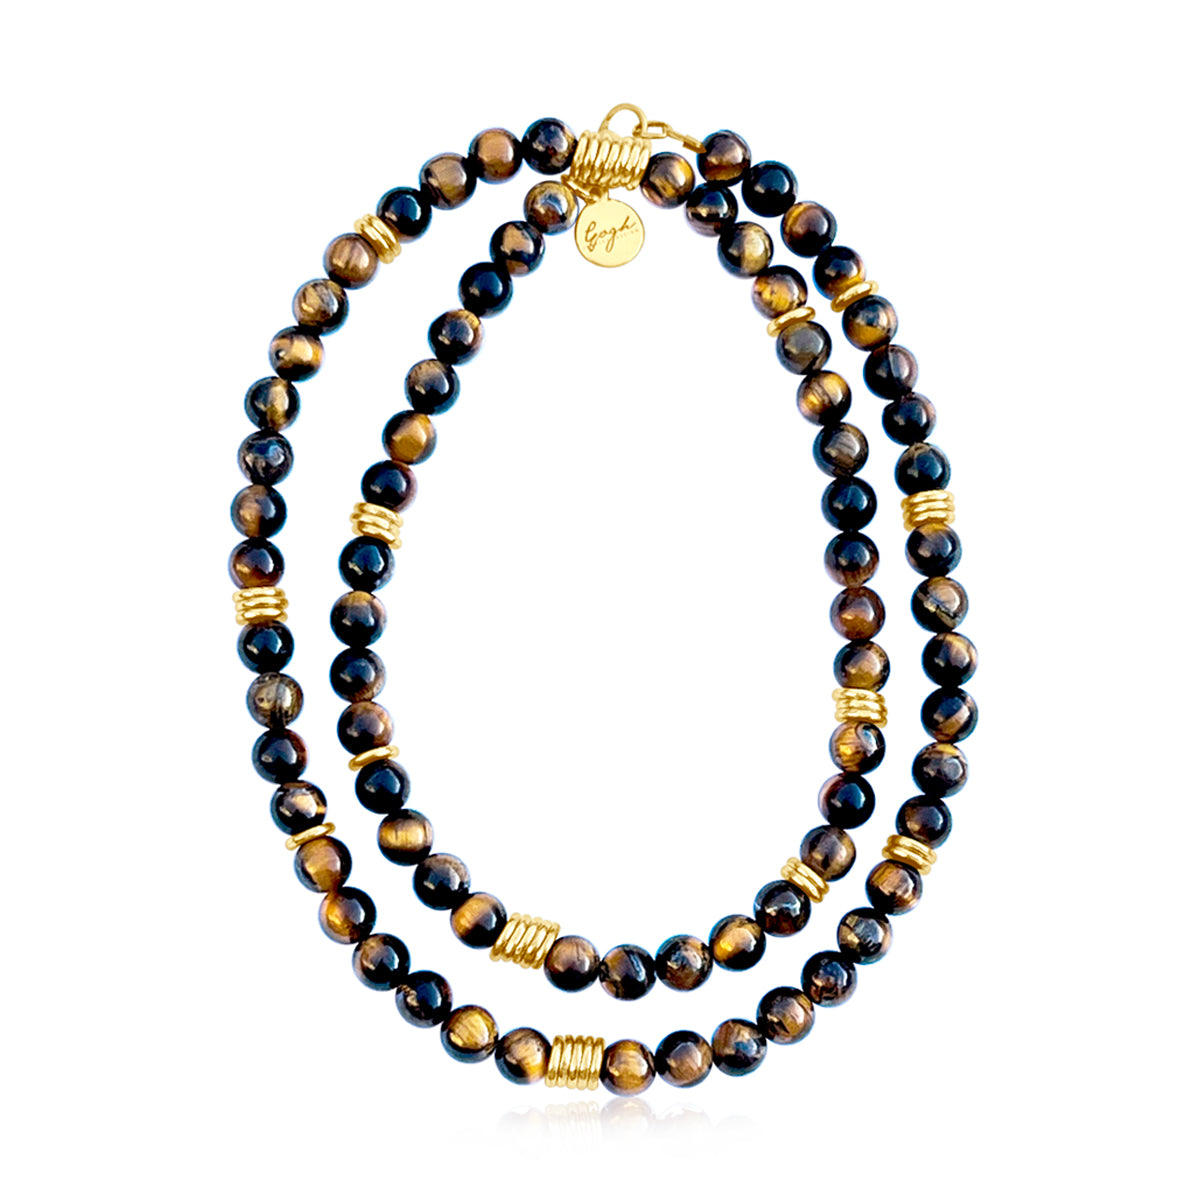 The "Leader of Courage" Tiger Eye Necklace invites you to embrace the leadership qualities of courage, wisdom, and determination. Wear it with pride as a reminder of your inner strength and the unwavering courage to face life's journey with resilience and grace.